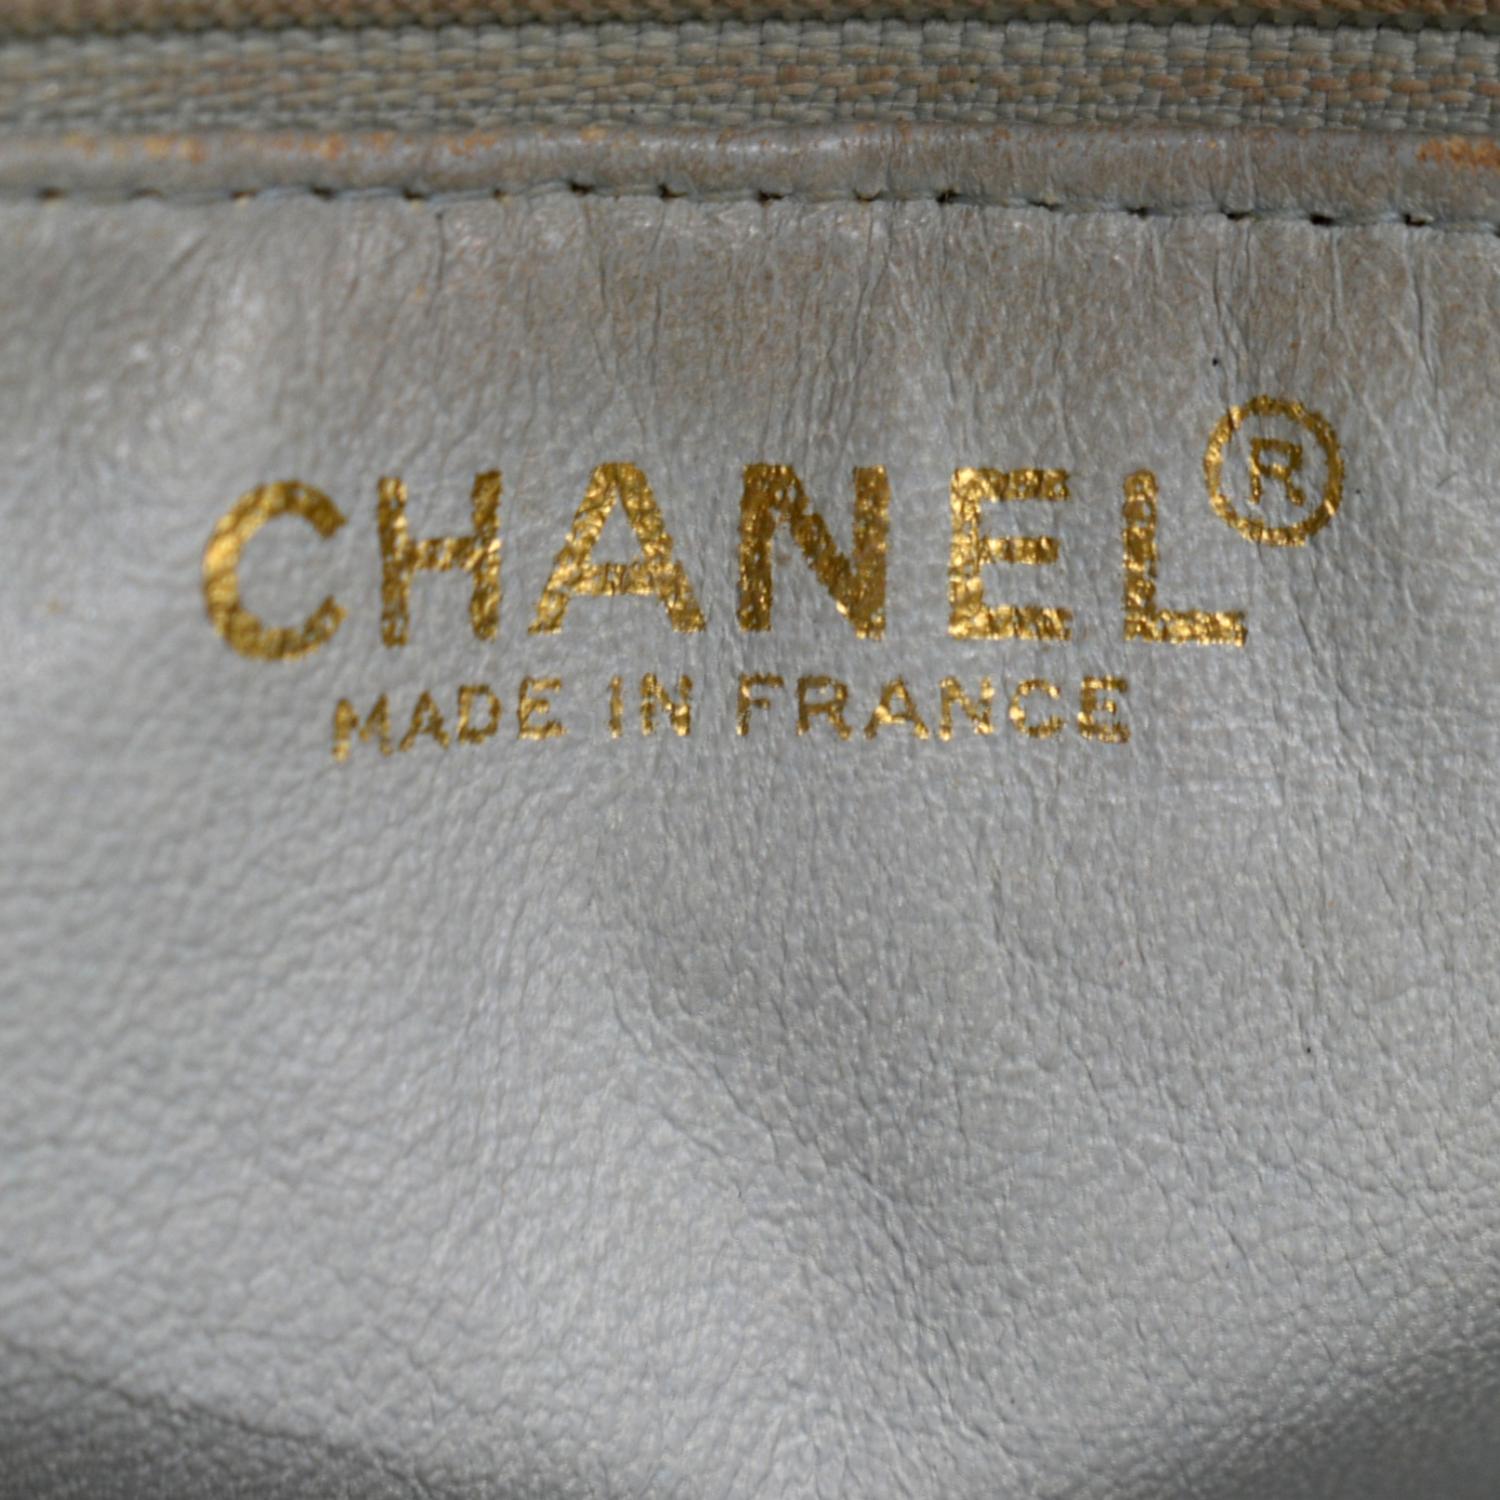 Chanel Quilted Medallion Tote - ShopStyle